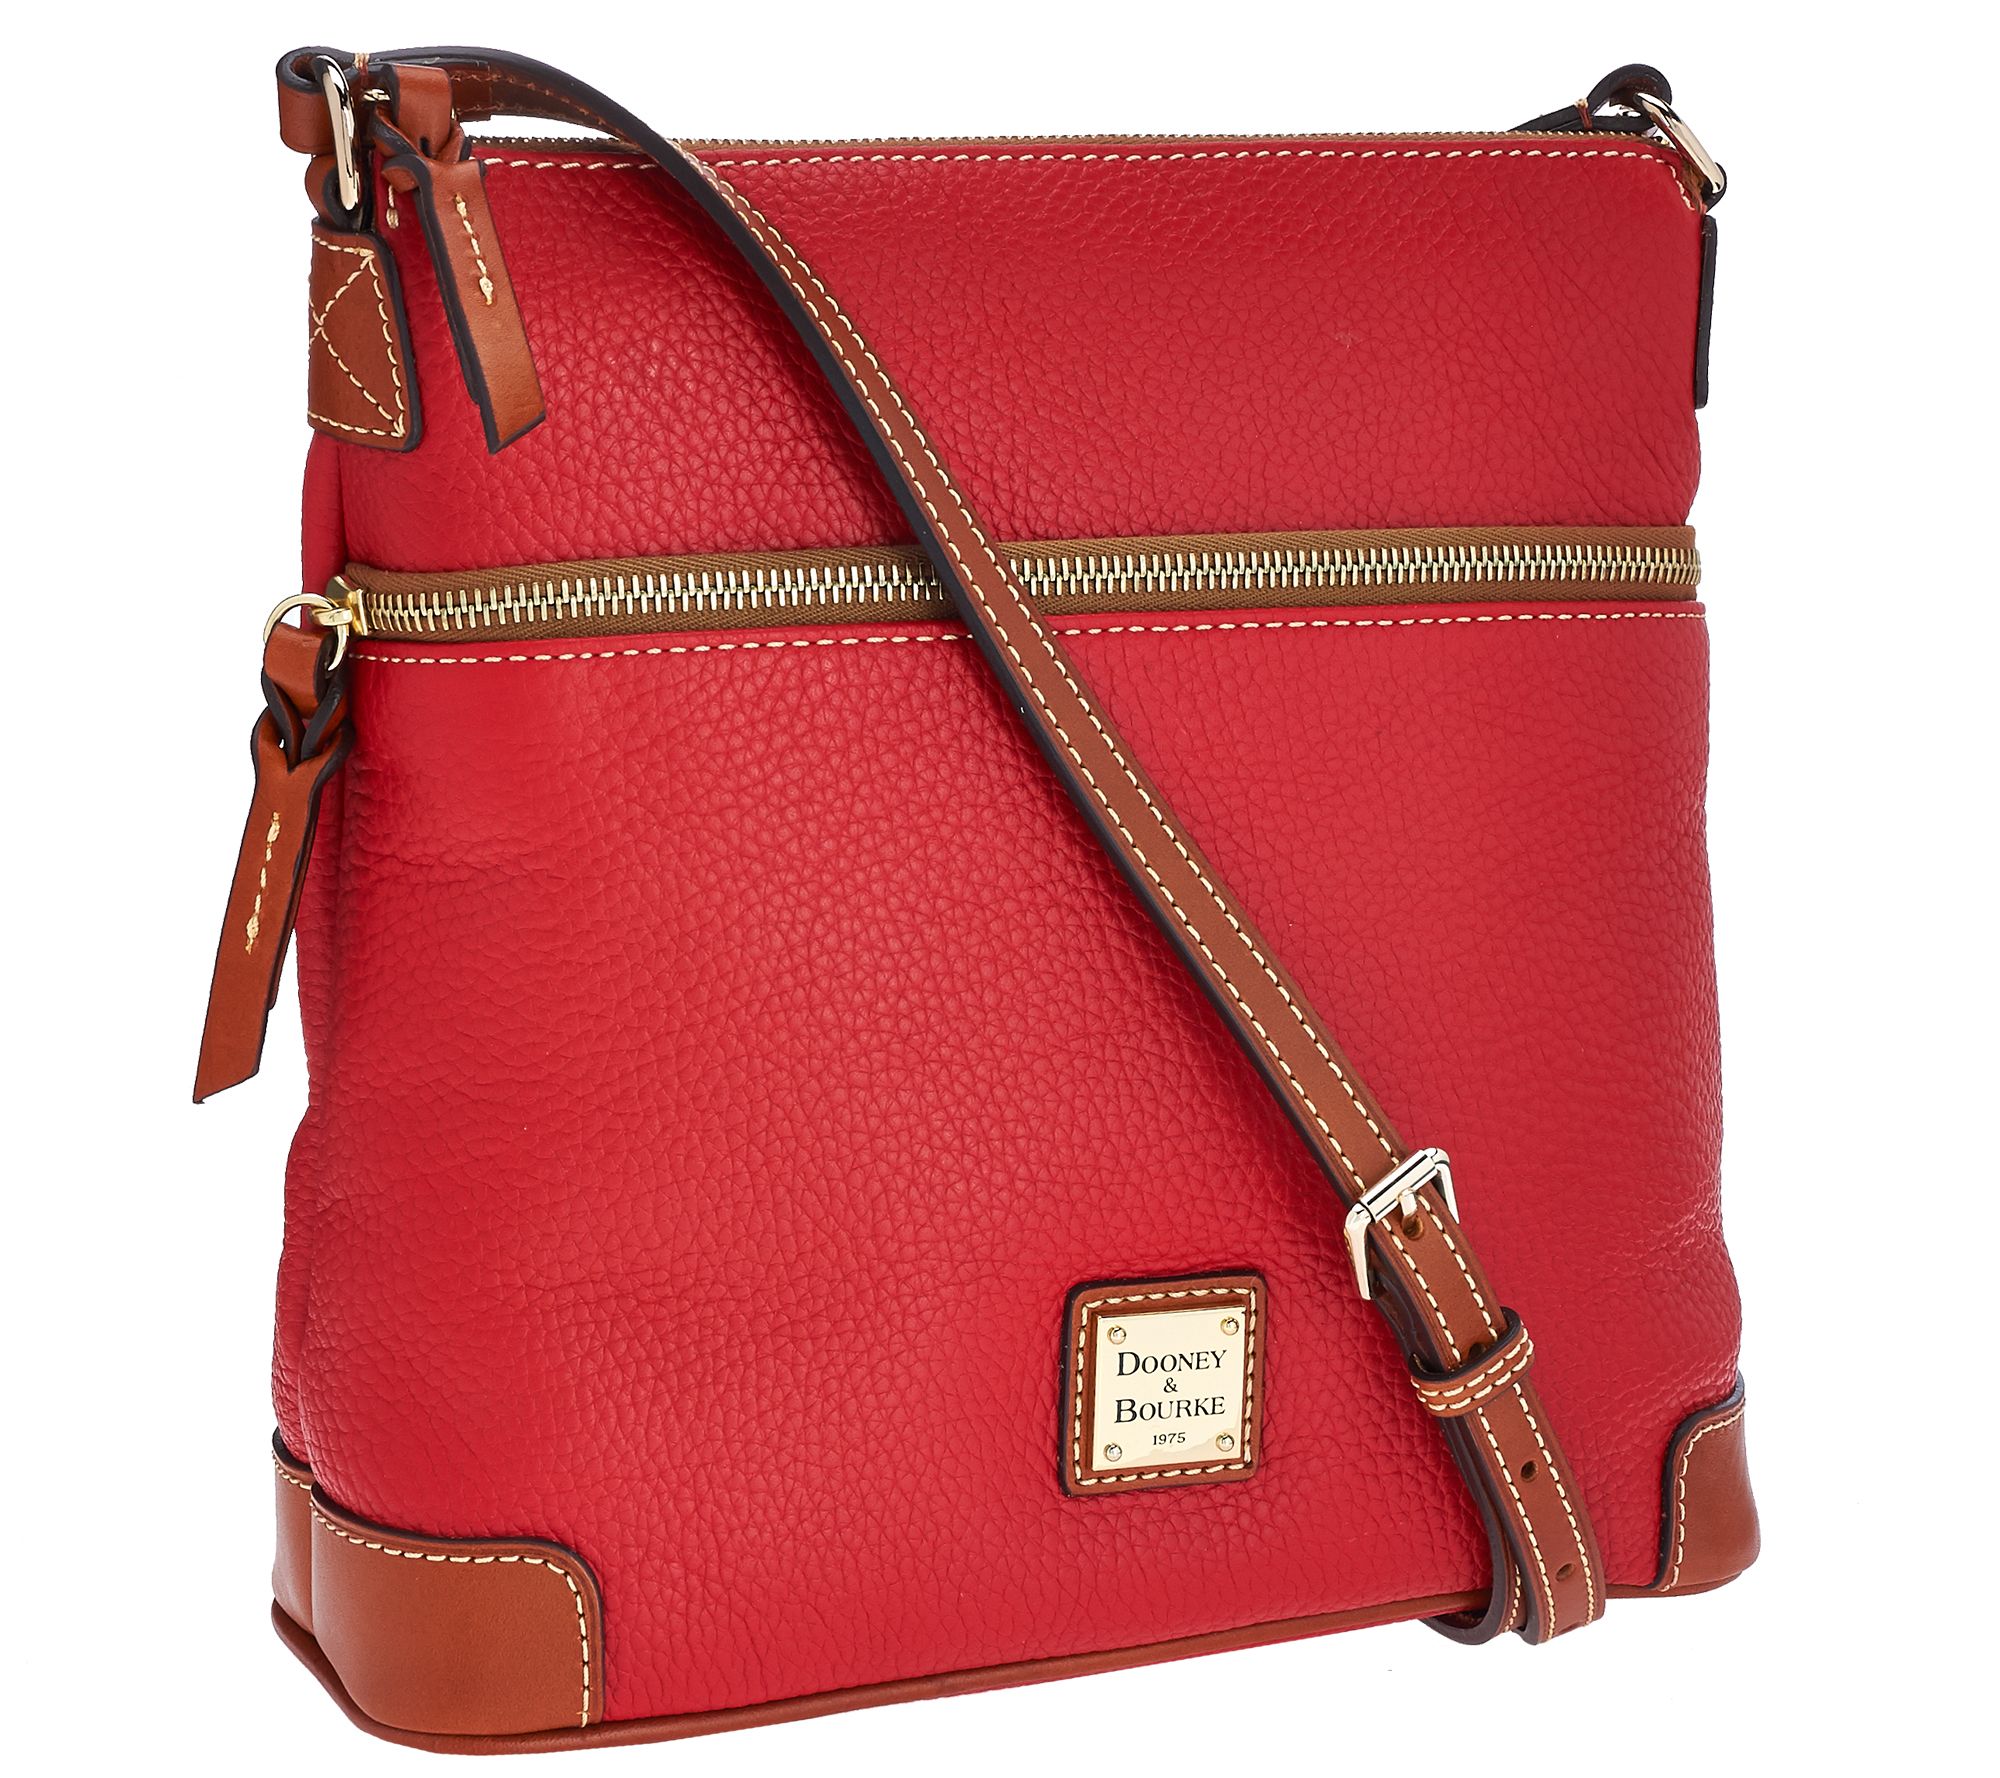 Dooney & Bourke small leather Lexi Crossbody Tomato Red w/Brown Accents